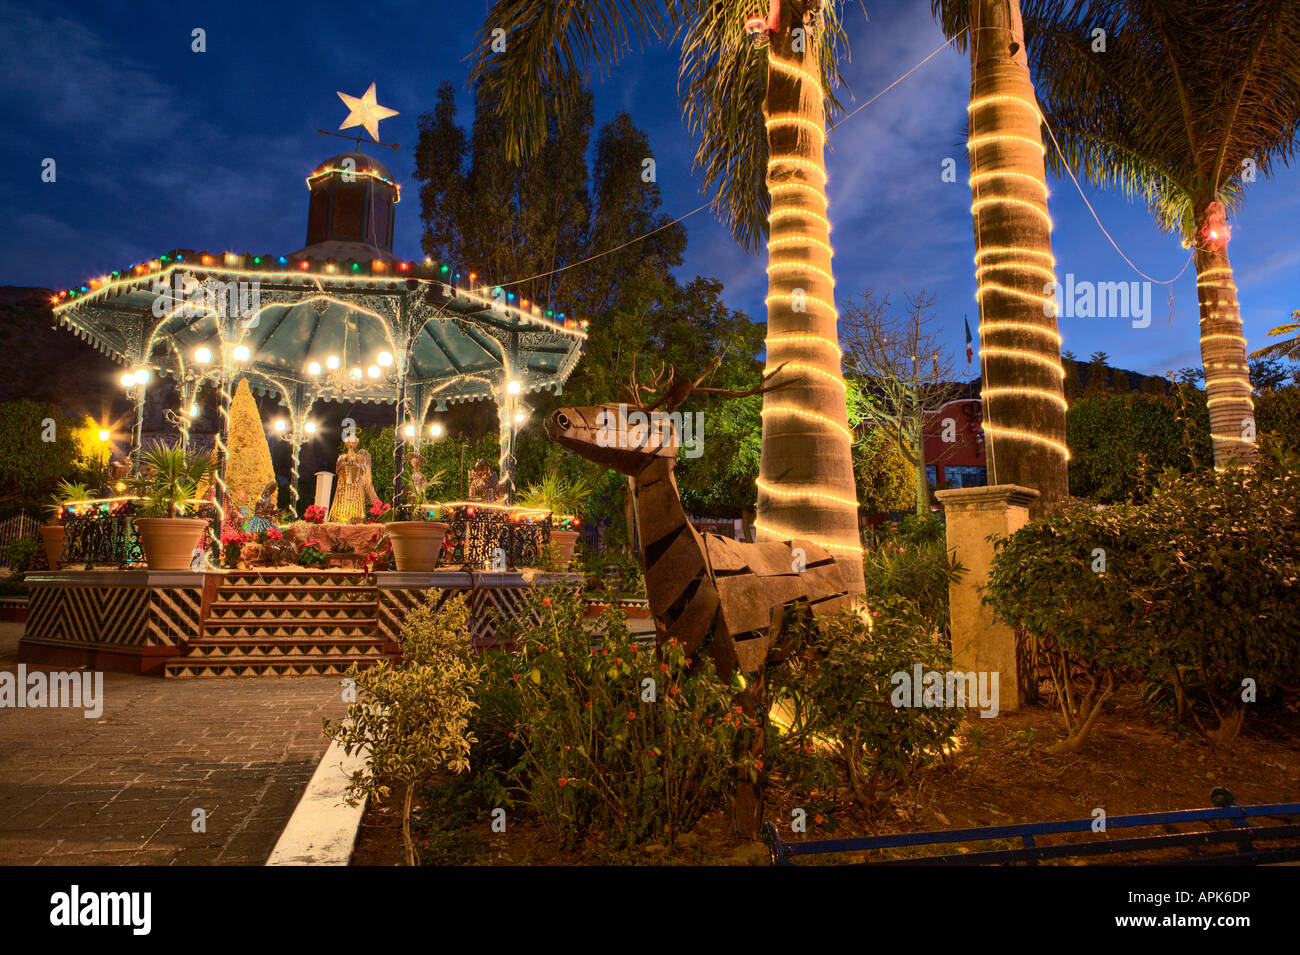 Christmas decorations in Mexican square Stock Photo